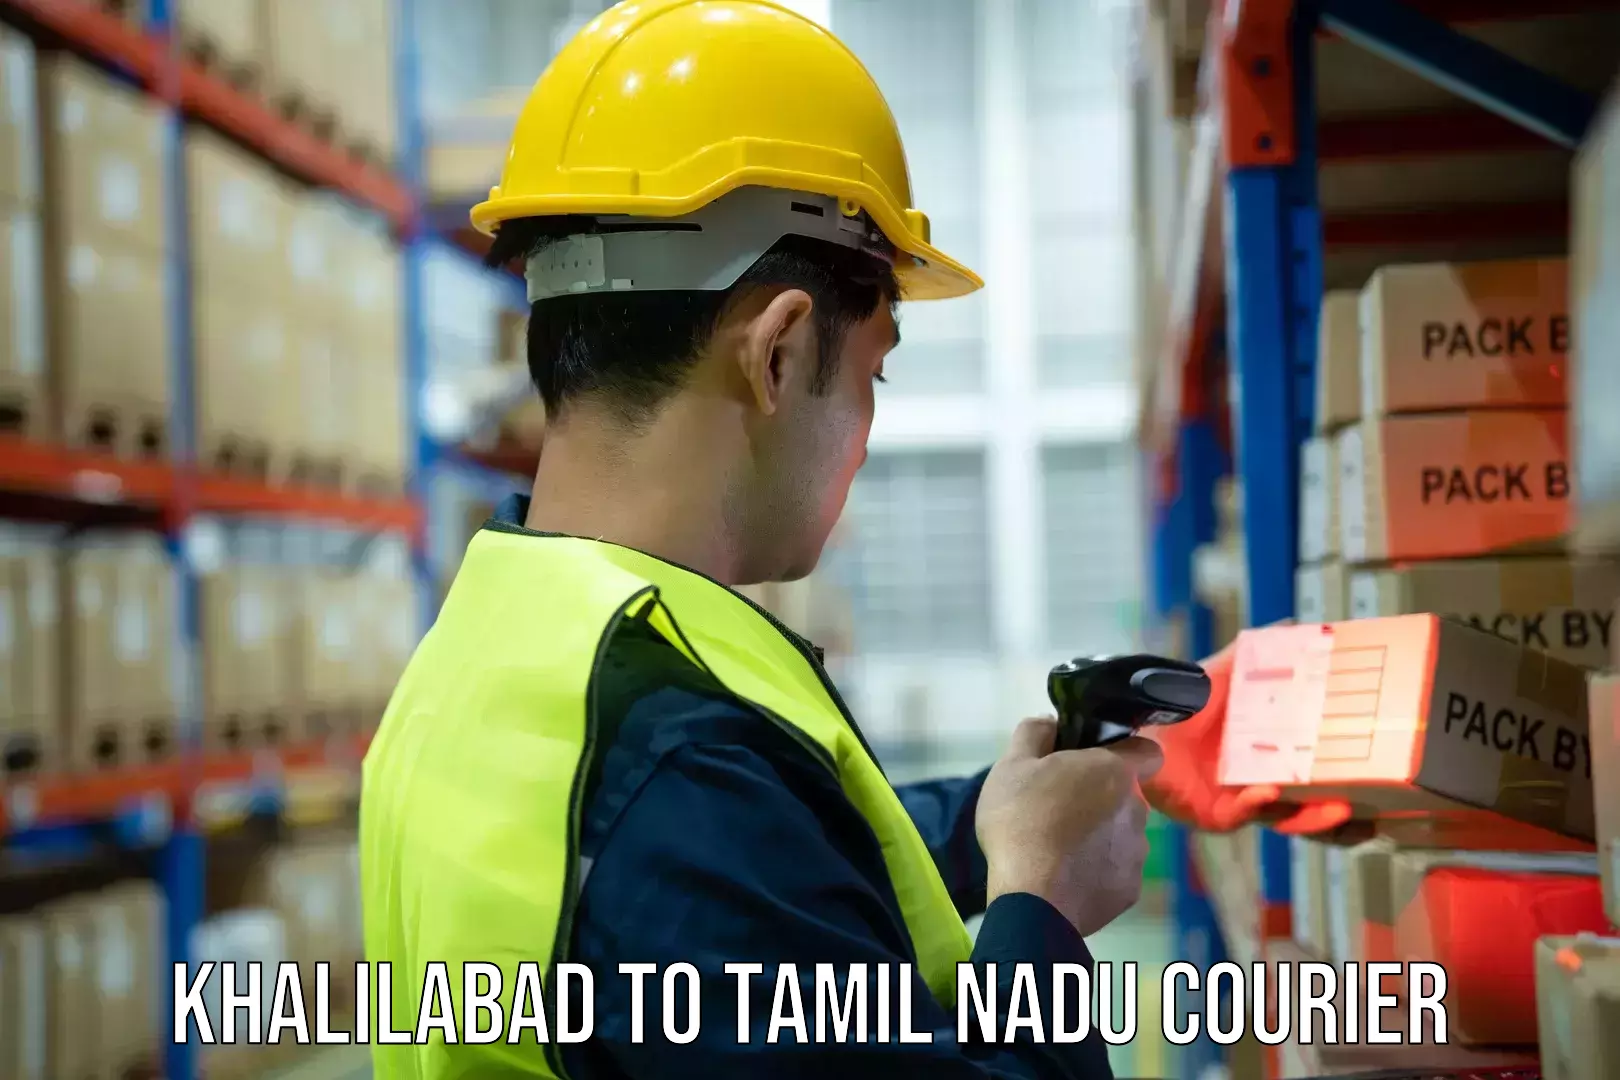 Sustainable courier practices Khalilabad to Tamil Nadu